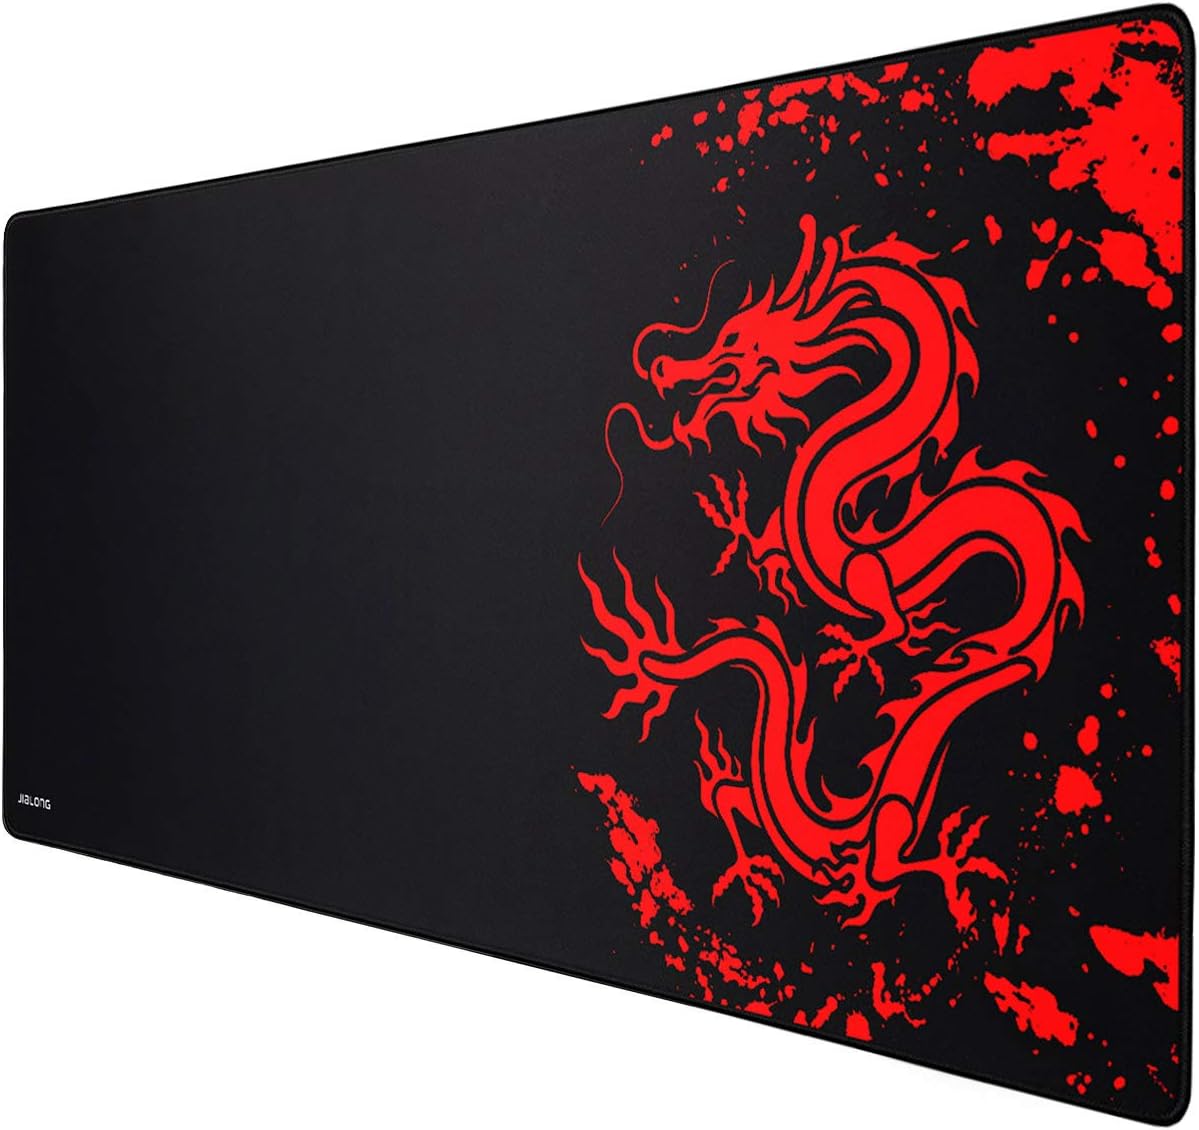 JIALONG Gaming Mouse Pad Large Size 35.4 X 15.7X 0.12inches Desk Mousepad with Personalized Design for Laptop, Computer PC - Red Dragon